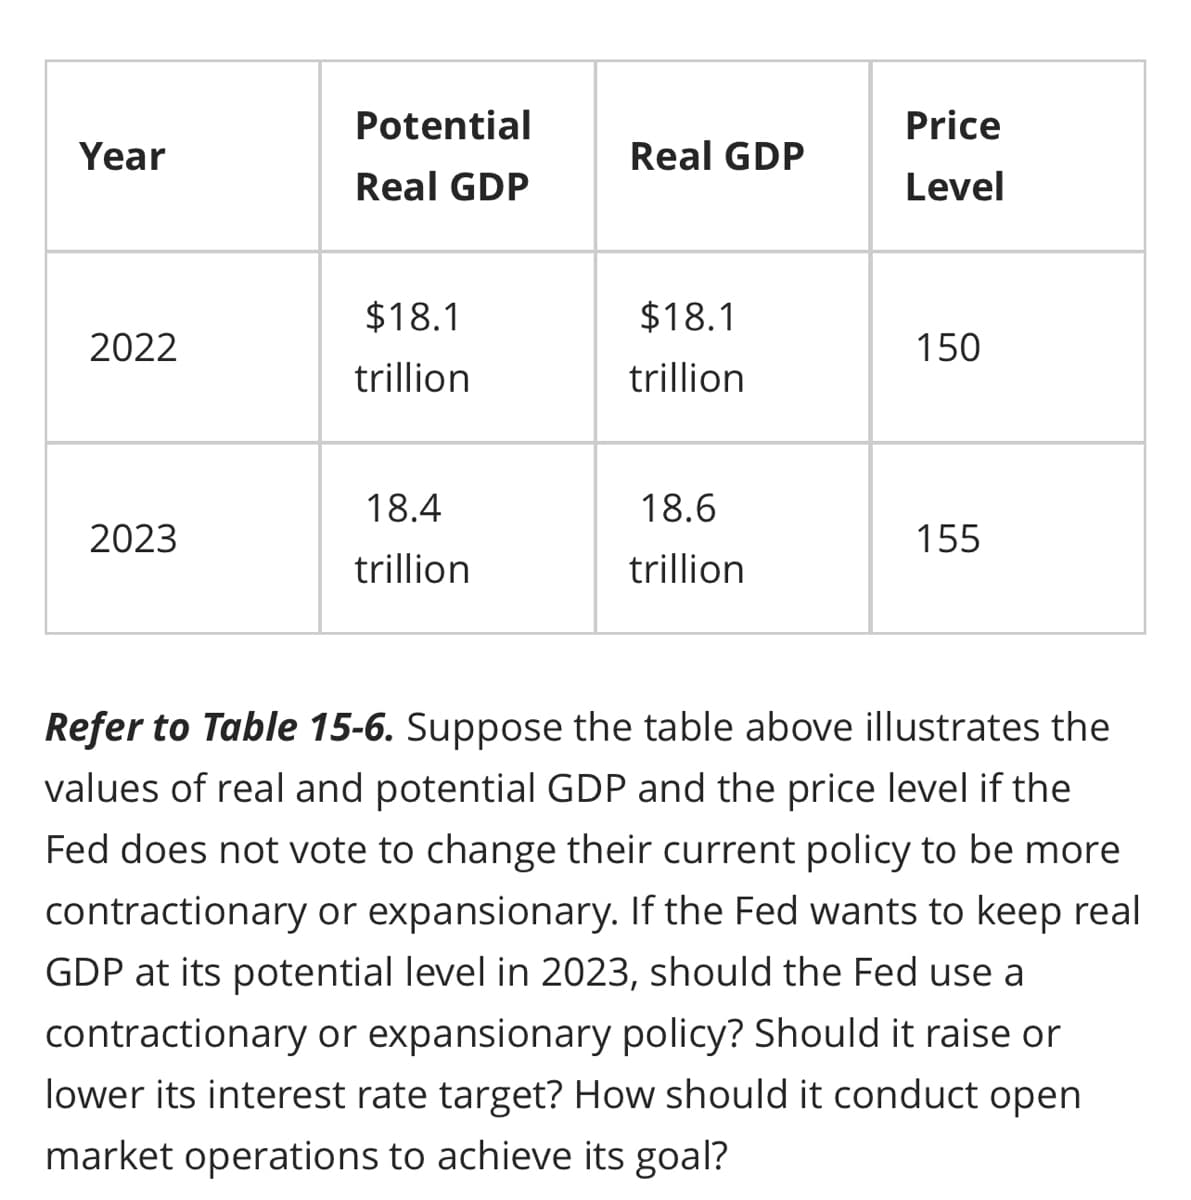 Year
2022
2023
Potential
Real GDP
$18.1
trillion
18.4
trillion
Real GDP
$18.1
trillion
18.6
trillion
Price
Level
150
155
Refer to Table 15-6. Suppose the table above illustrates the
values of real and potential GDP and the price level if the
Fed does not vote to change their current policy to be more
contractionary or expansionary. If the Fed wants to keep real
GDP at its potential level in 2023, should the Fed use a
contractionary or expansionary policy? Should it raise or
lower its interest rate target? How should it conduct open
market operations to achieve its goal?